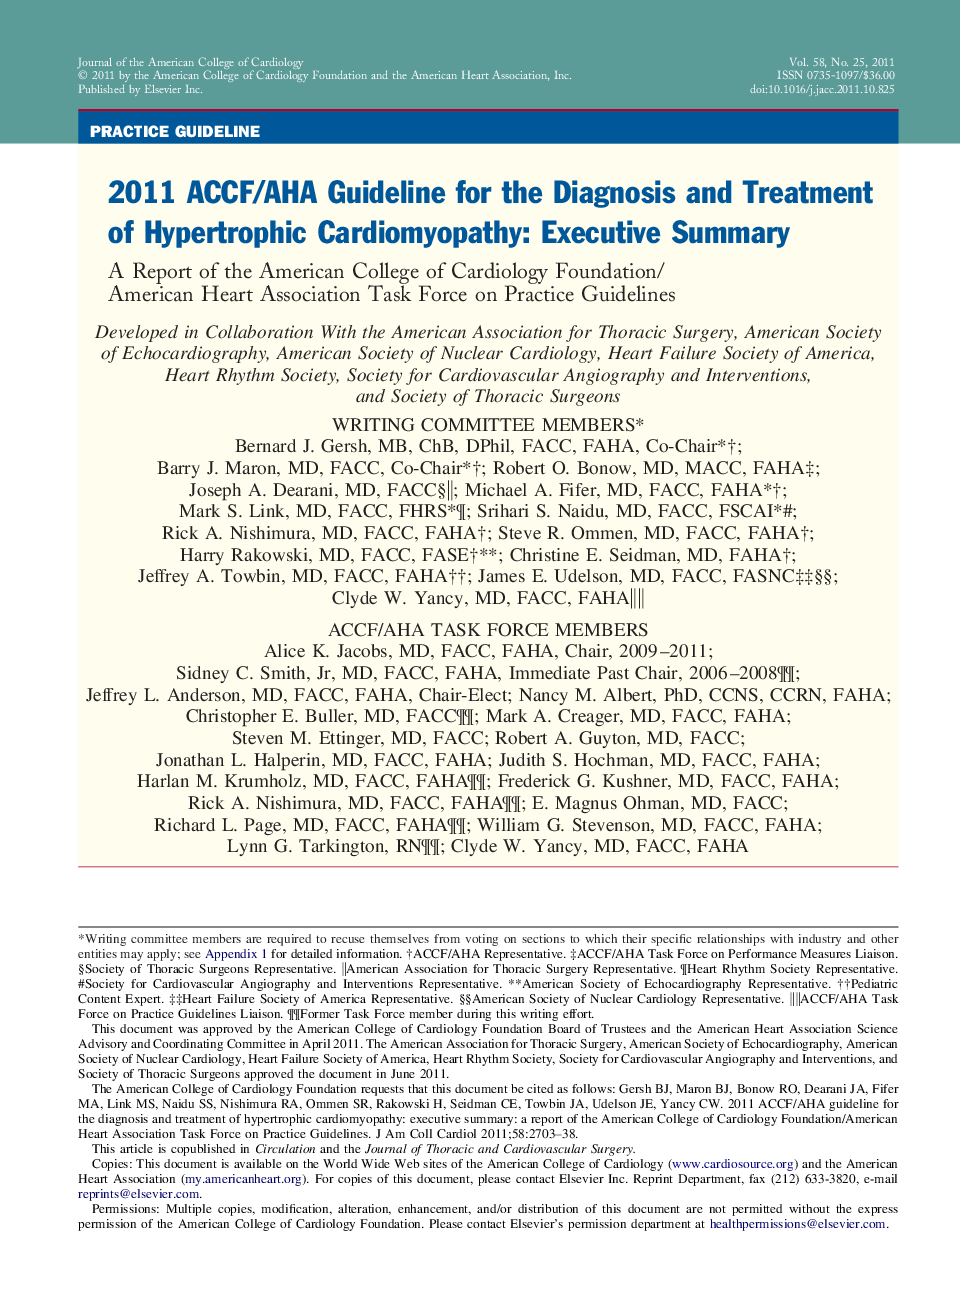 2011 ACCF/AHA Guideline for the Diagnosis and Treatment of Hypertrophic Cardiomyopathy: Executive Summary